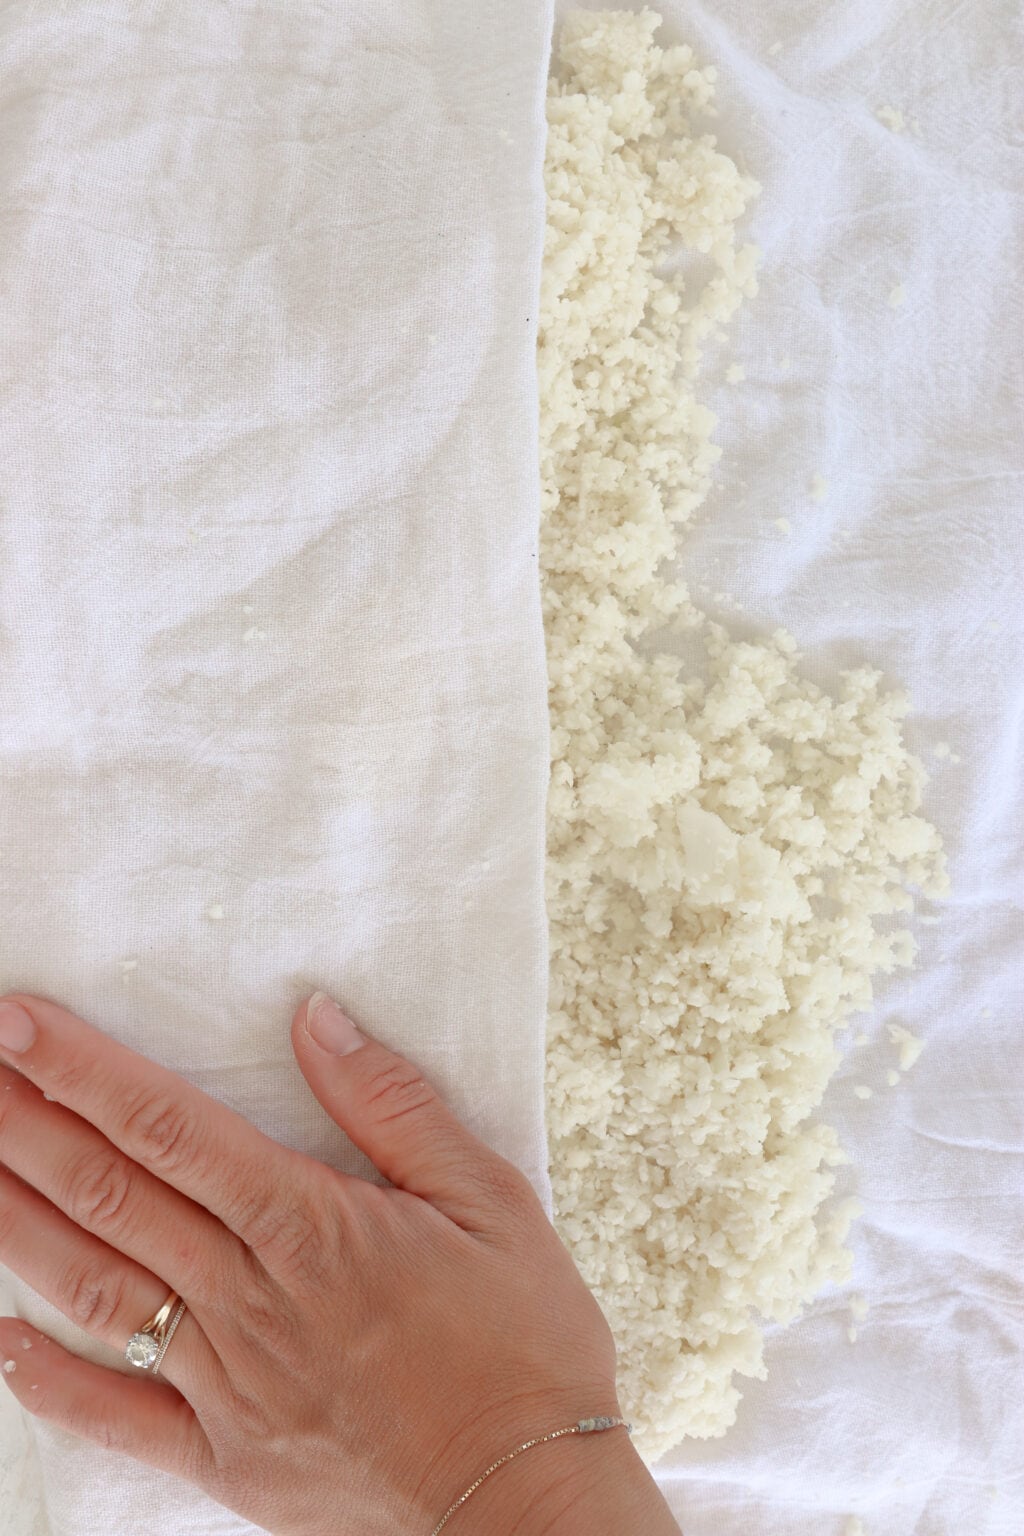 Cauliflower rice is on a white towel. There is a hand over the towel pressing the liquid out. 